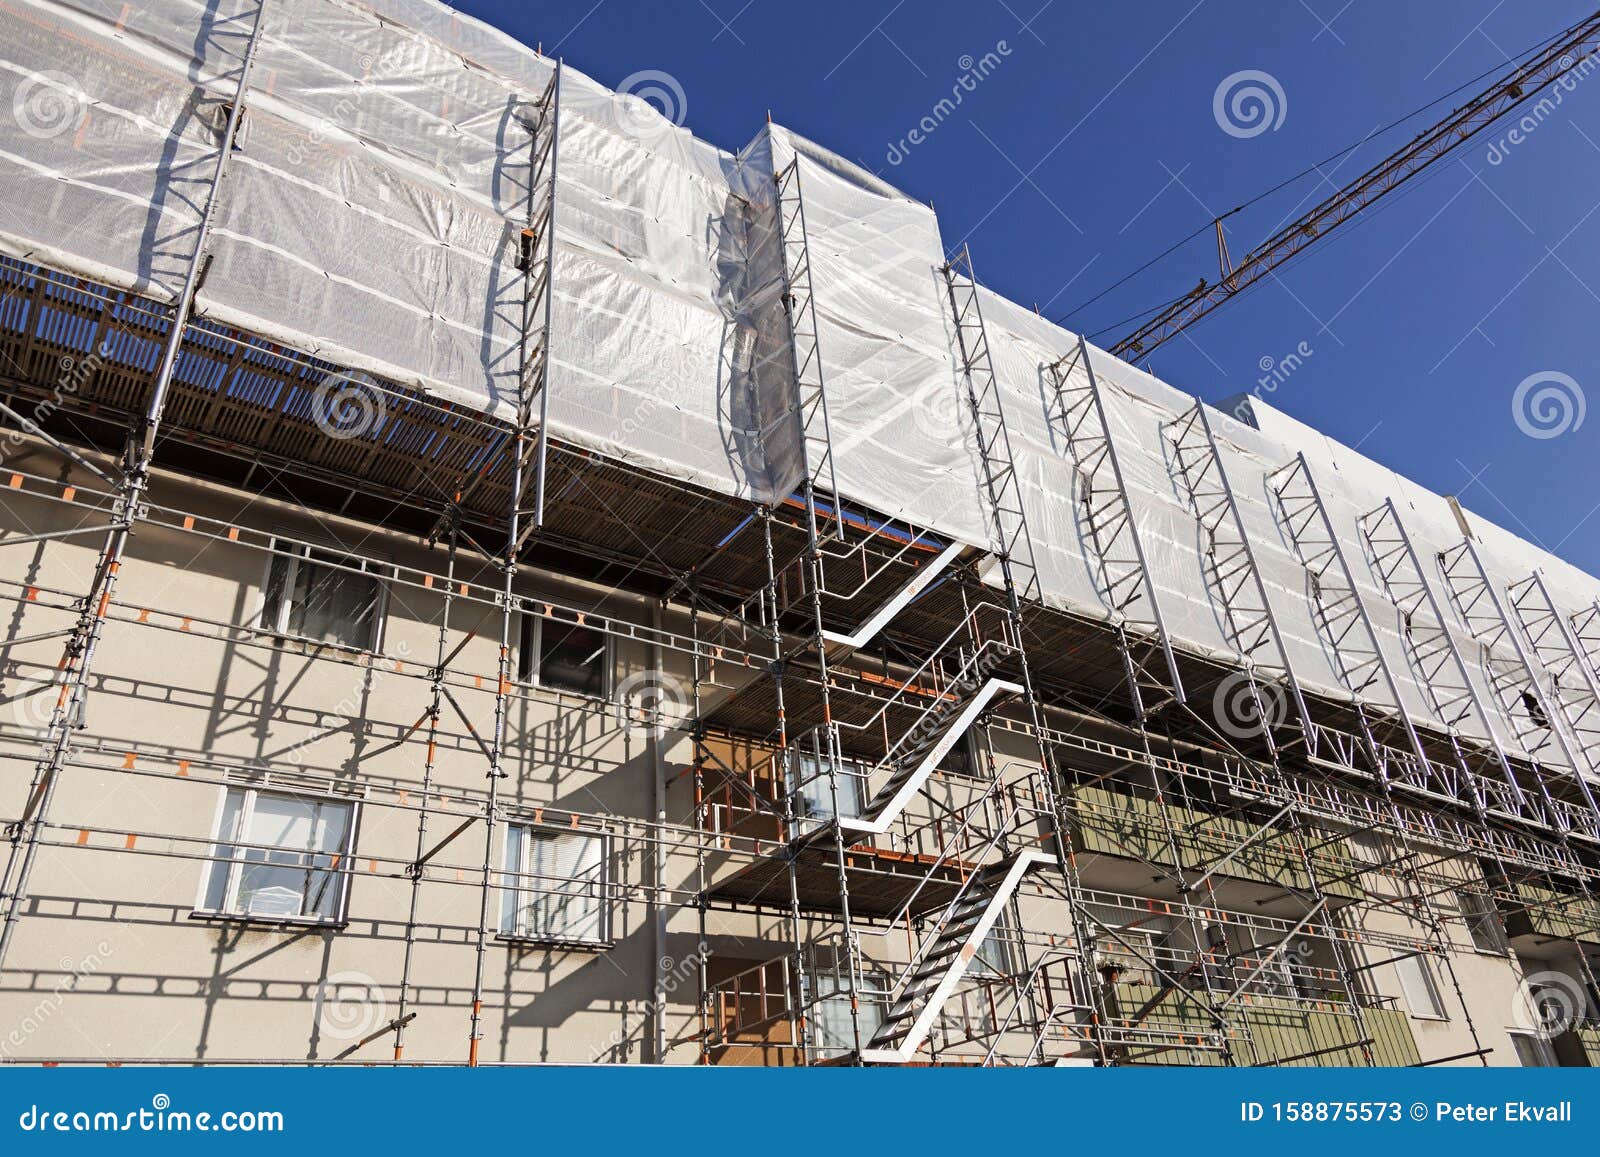 renovation of existing house on hedlunda with extension of additional floors. a lot of scaffolding has been installed and in the